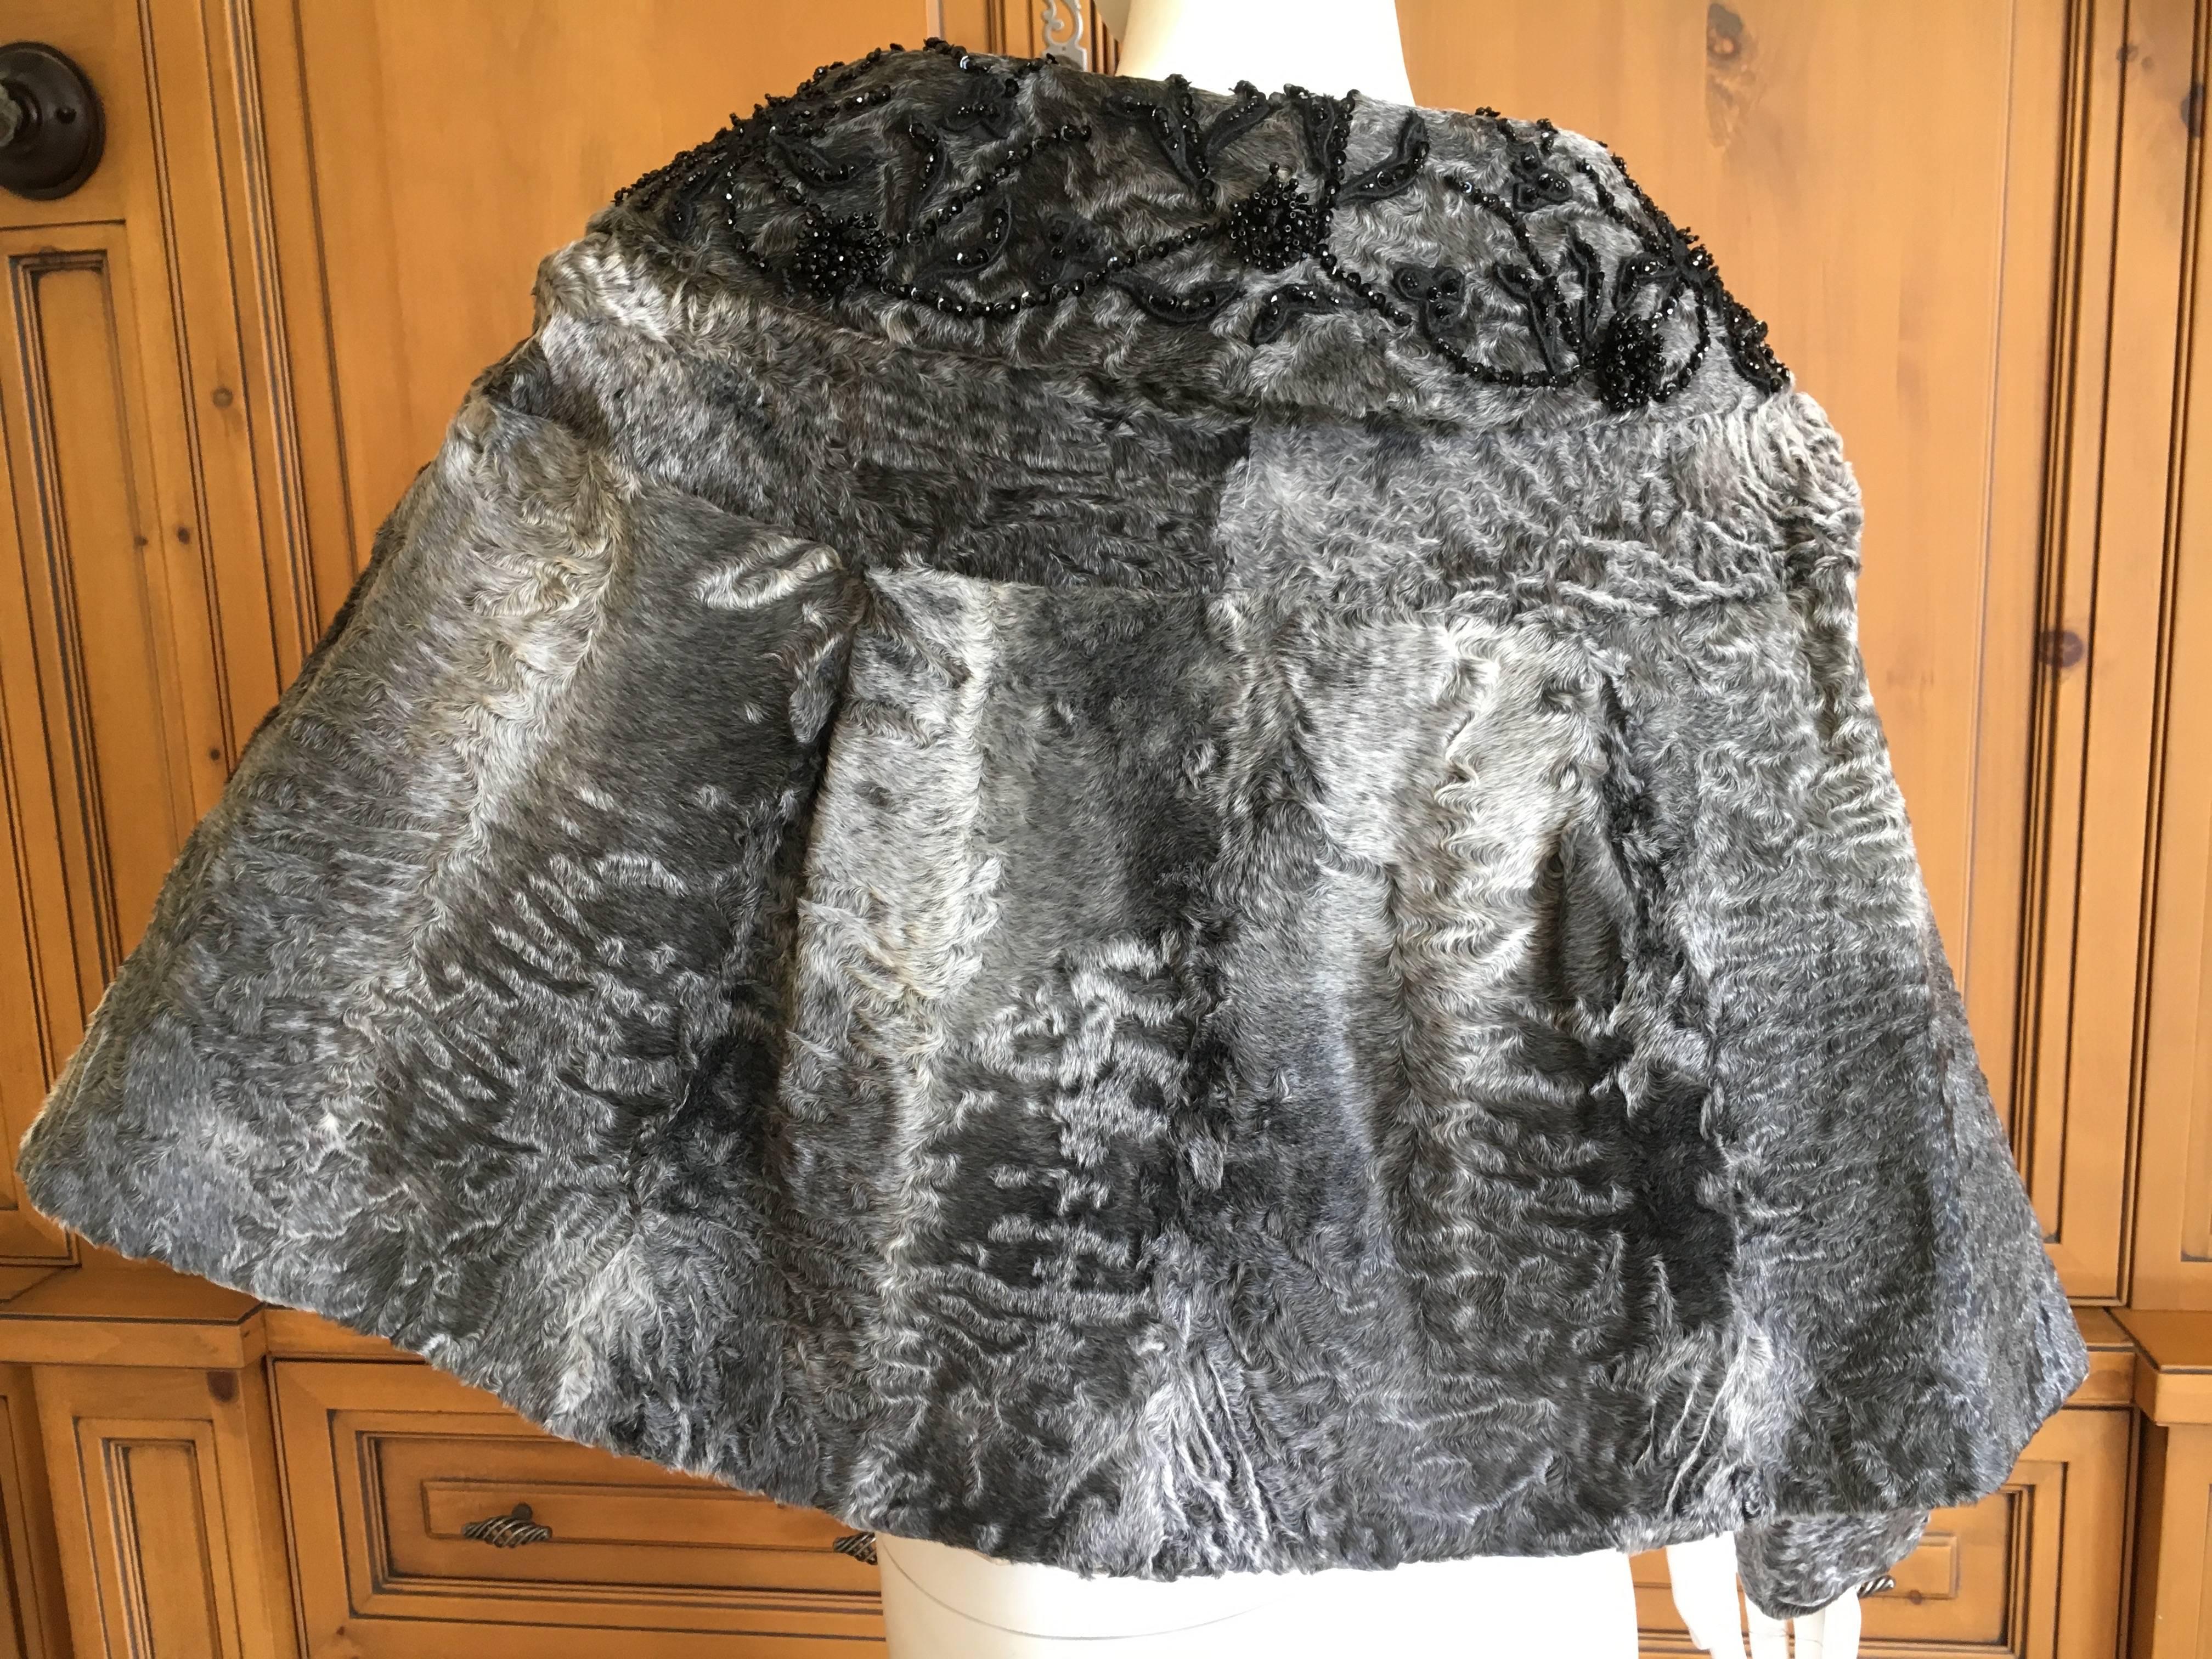 Prada Gray Broadtail Cape with Jet Bead Embellished Collar.
This has sleeve's inside, but can be worn as a caplet ore a jacket/cape.
Small